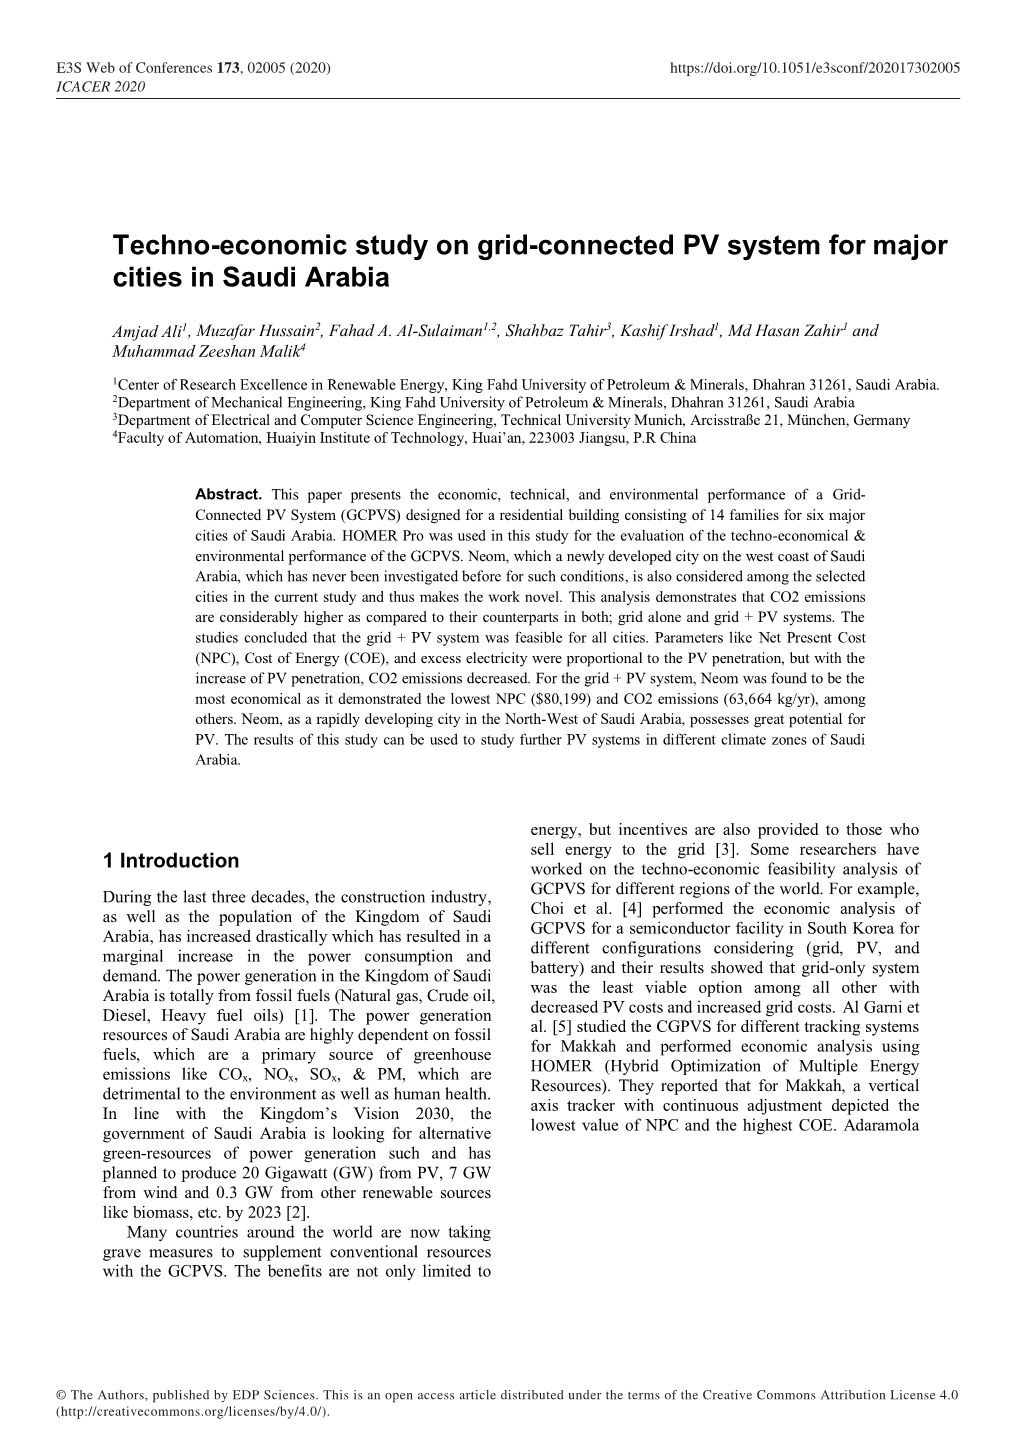 Techno-Economic Study on Grid-Connected PV System for Major Cities in Saudi Arabia